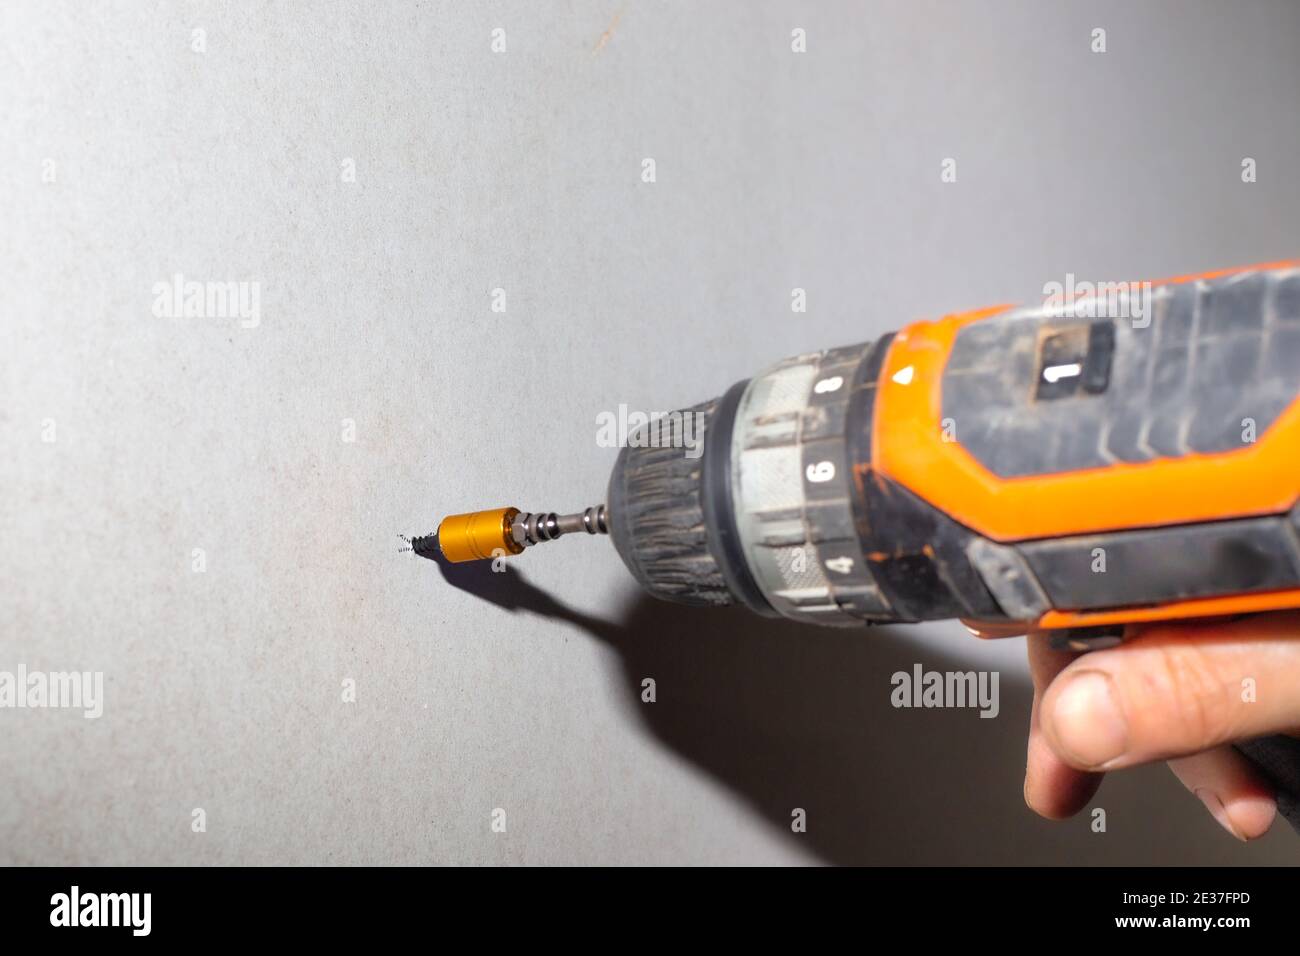 A man uses a screwdriver to screw a screw into a drywall. Home renovation, wall cladding. Stock Photo